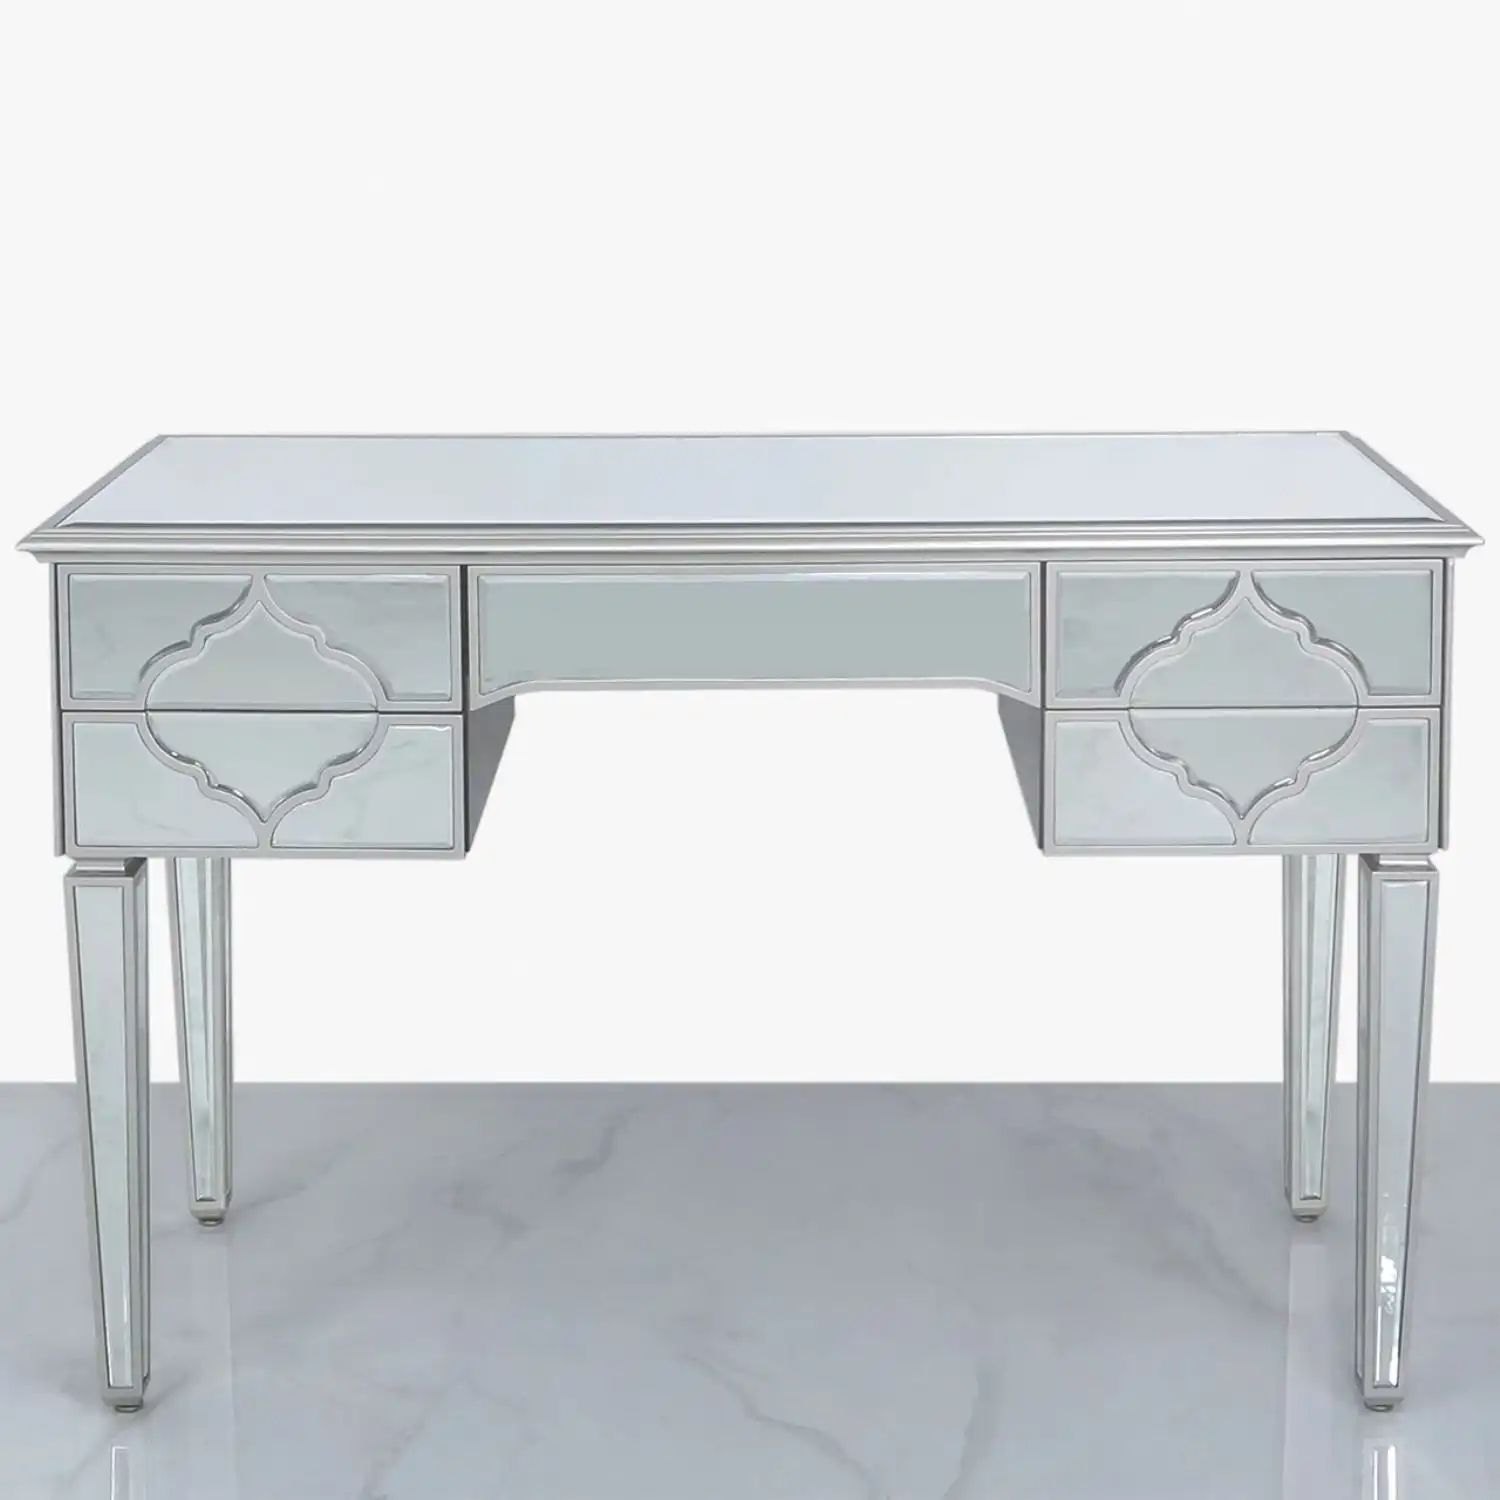 Morocco 5 Drawer Dressing Table Silver